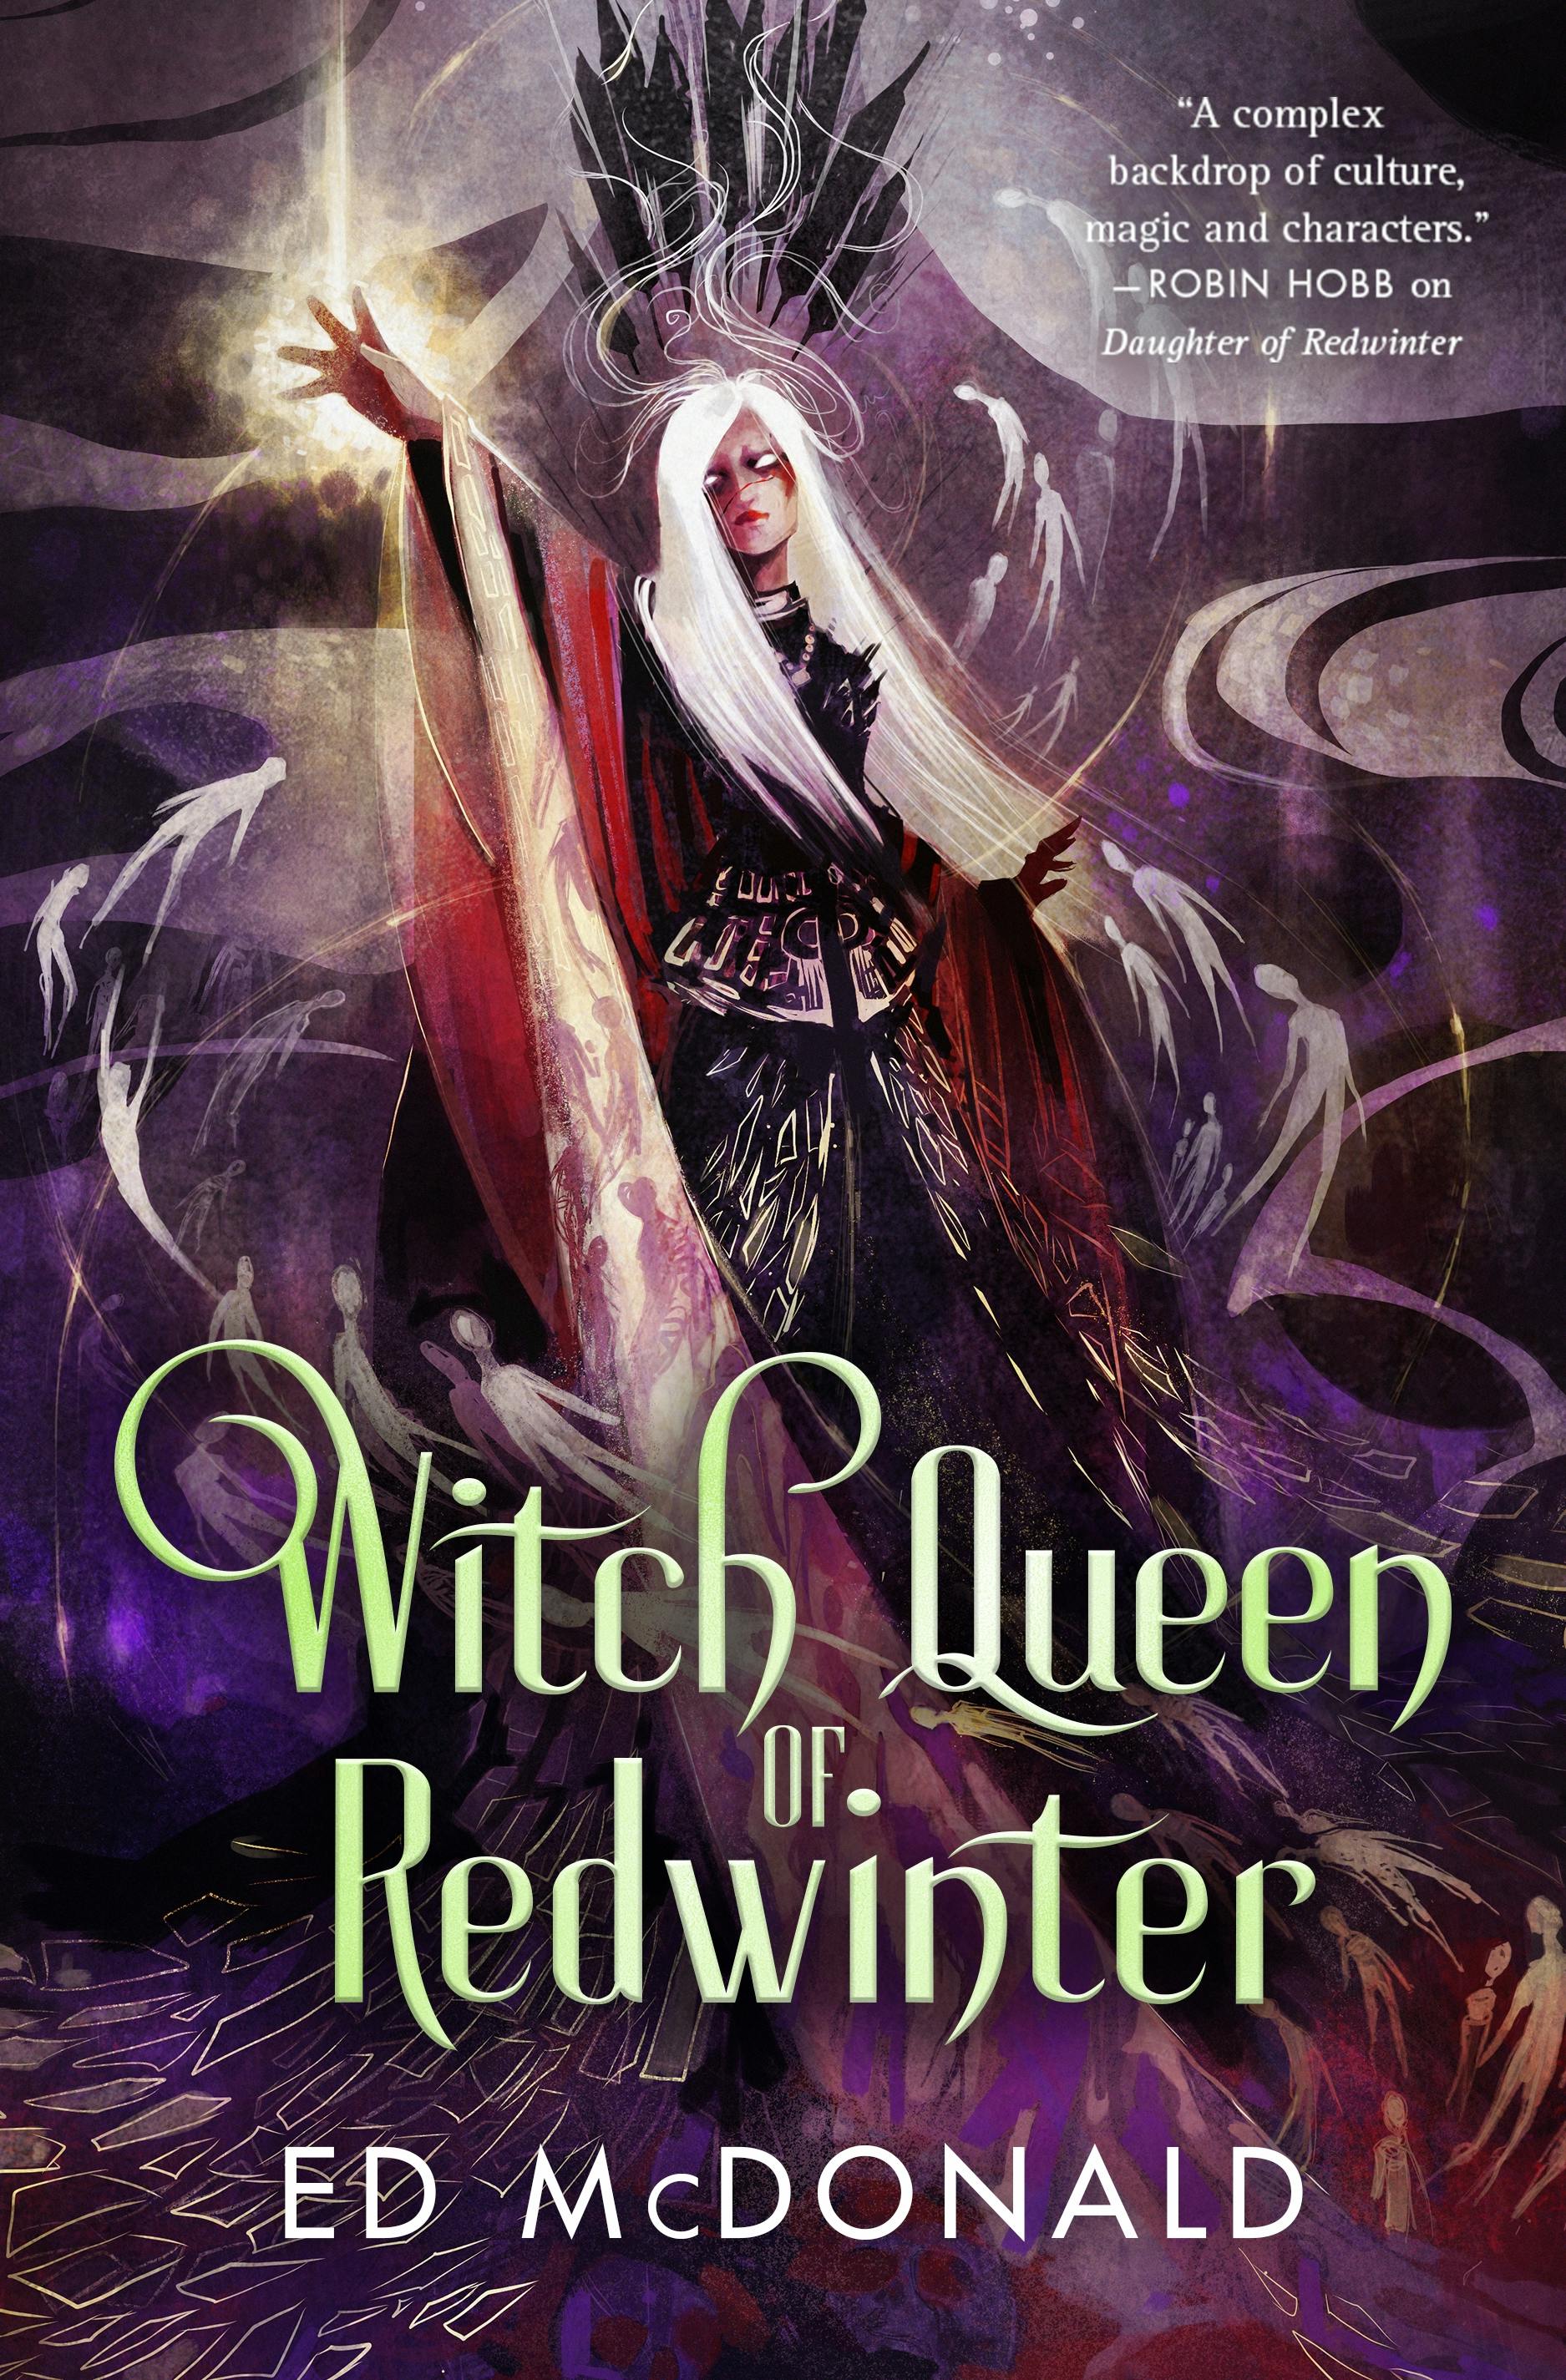 Cover for the book titled as: Witch Queen of Redwinter